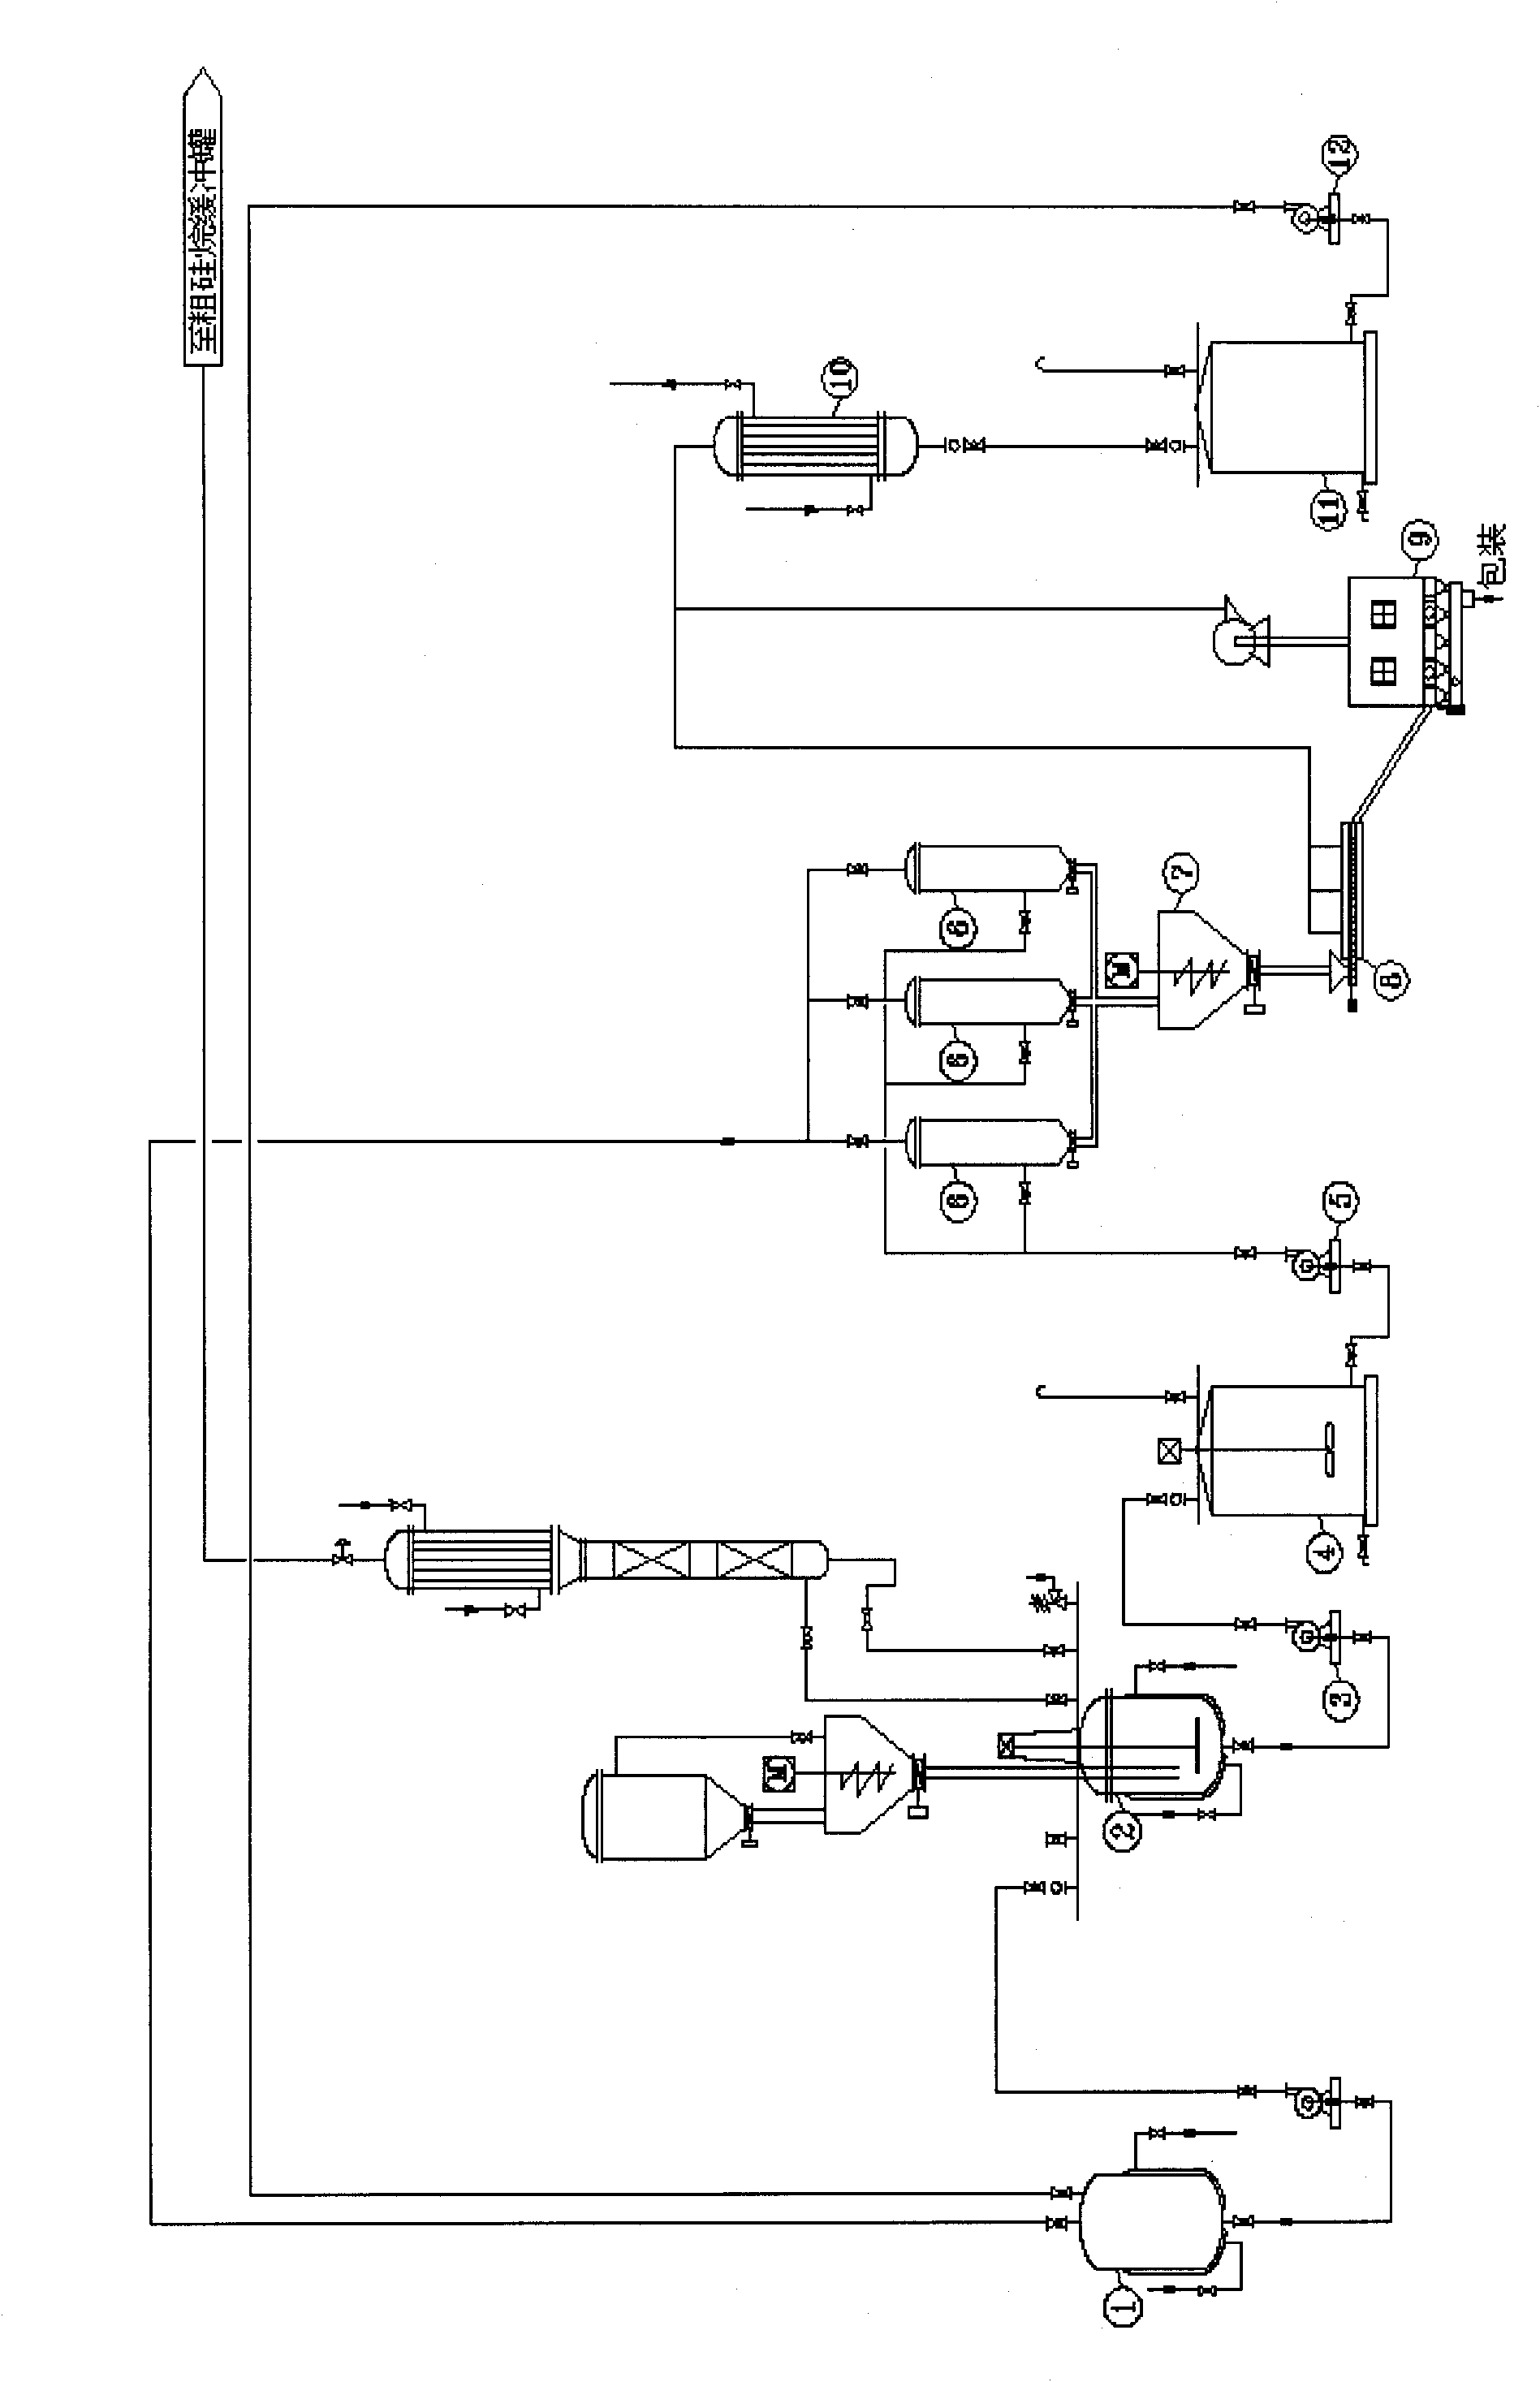 Method and device for separating magnesium chloride hexammoniate during silane production by the magnesium silicide method